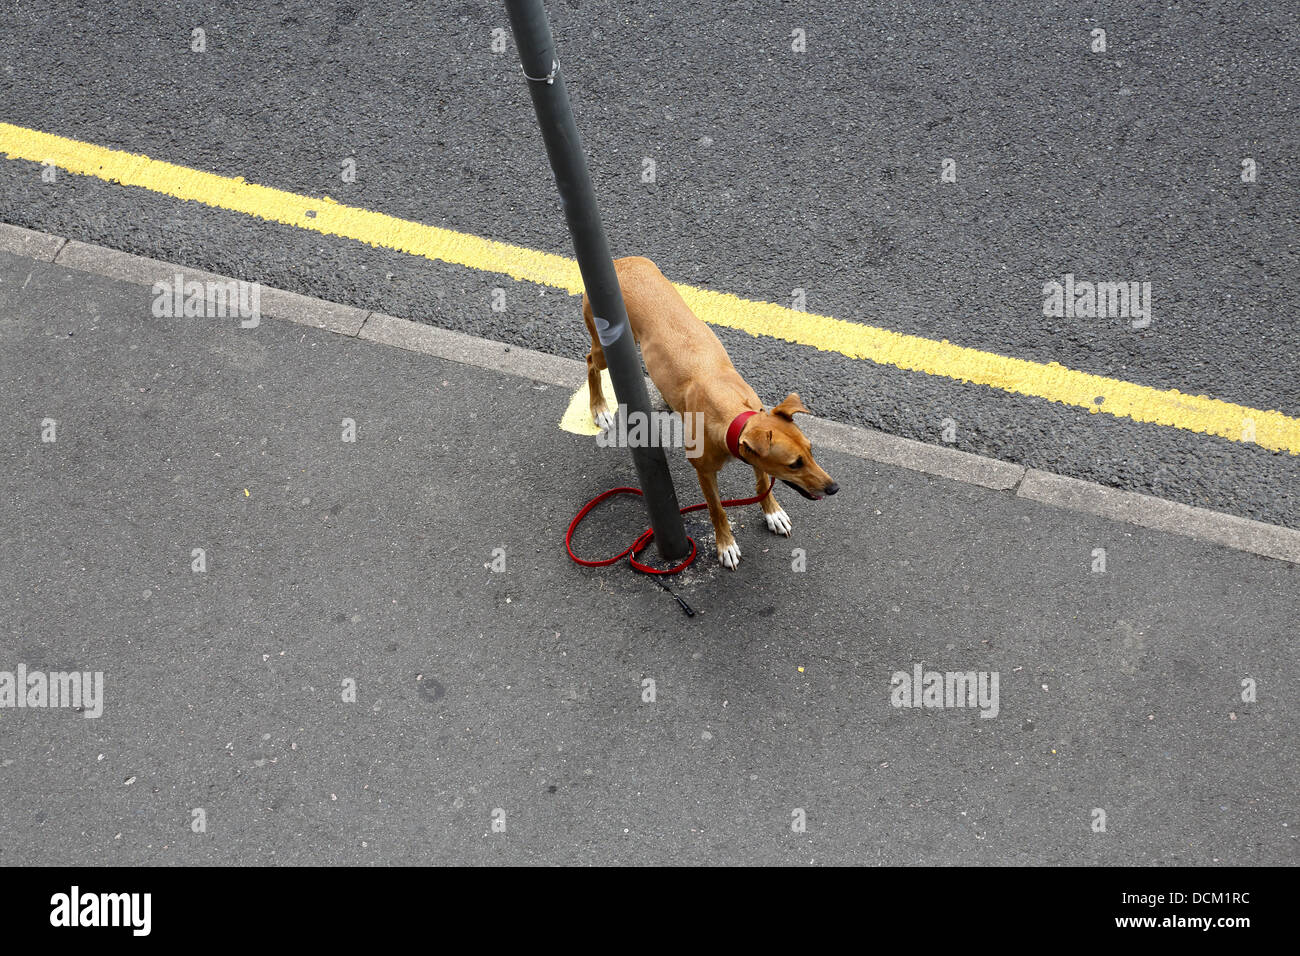 Tethered dog on a leash tied to a lamppost in the road. Stock Photo